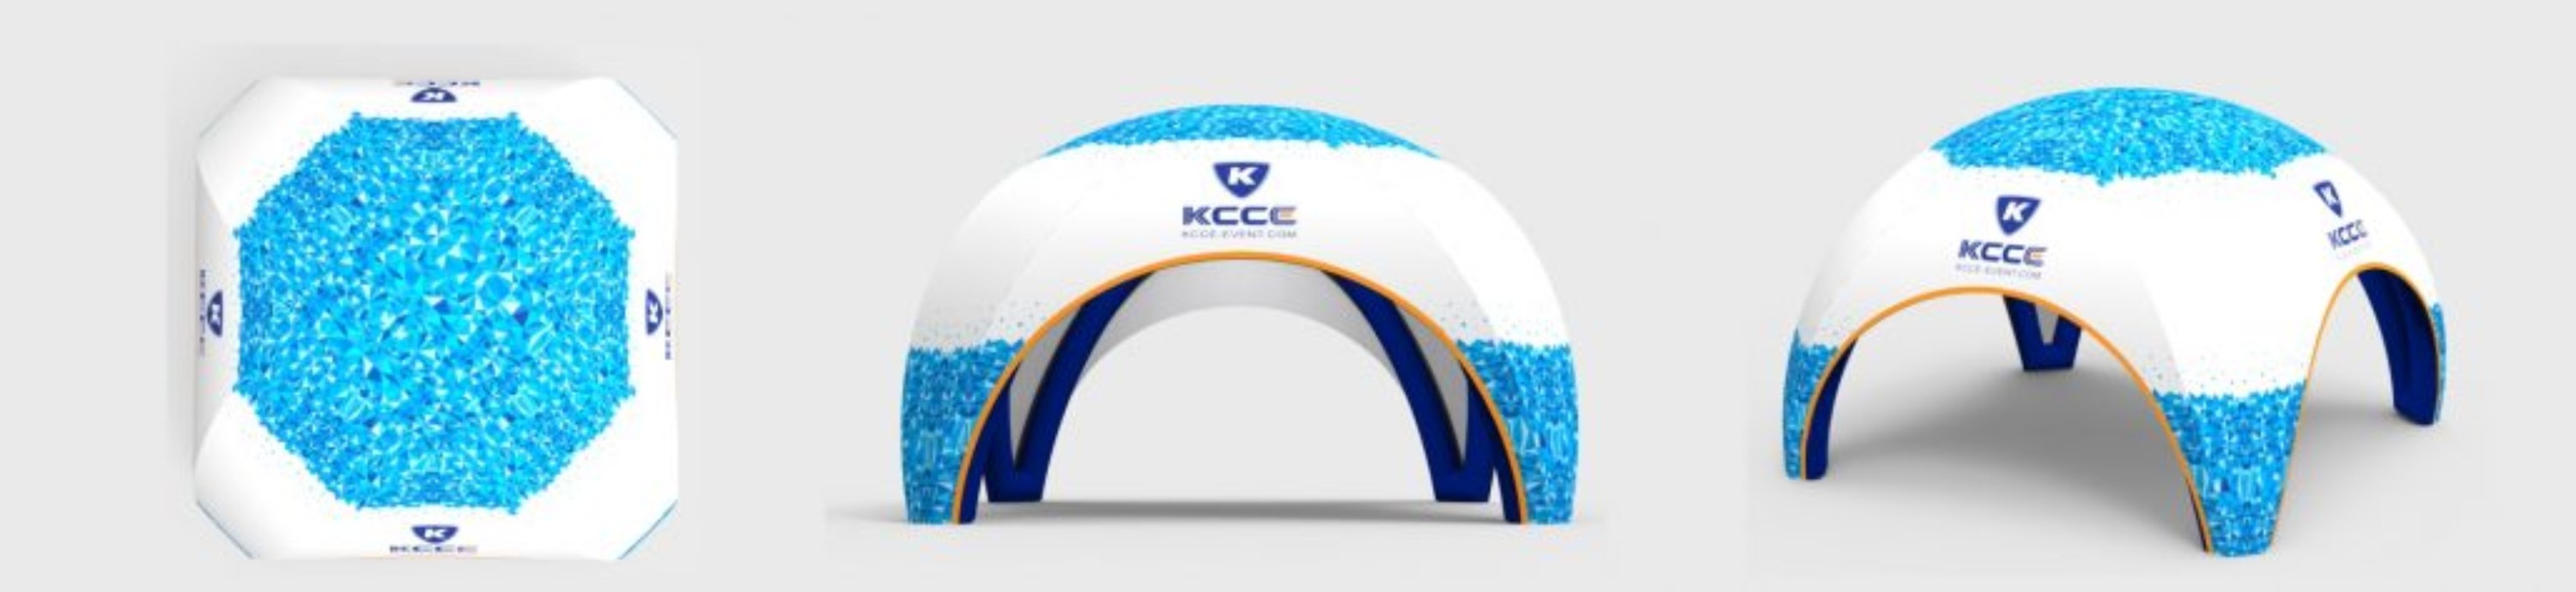 large size tent